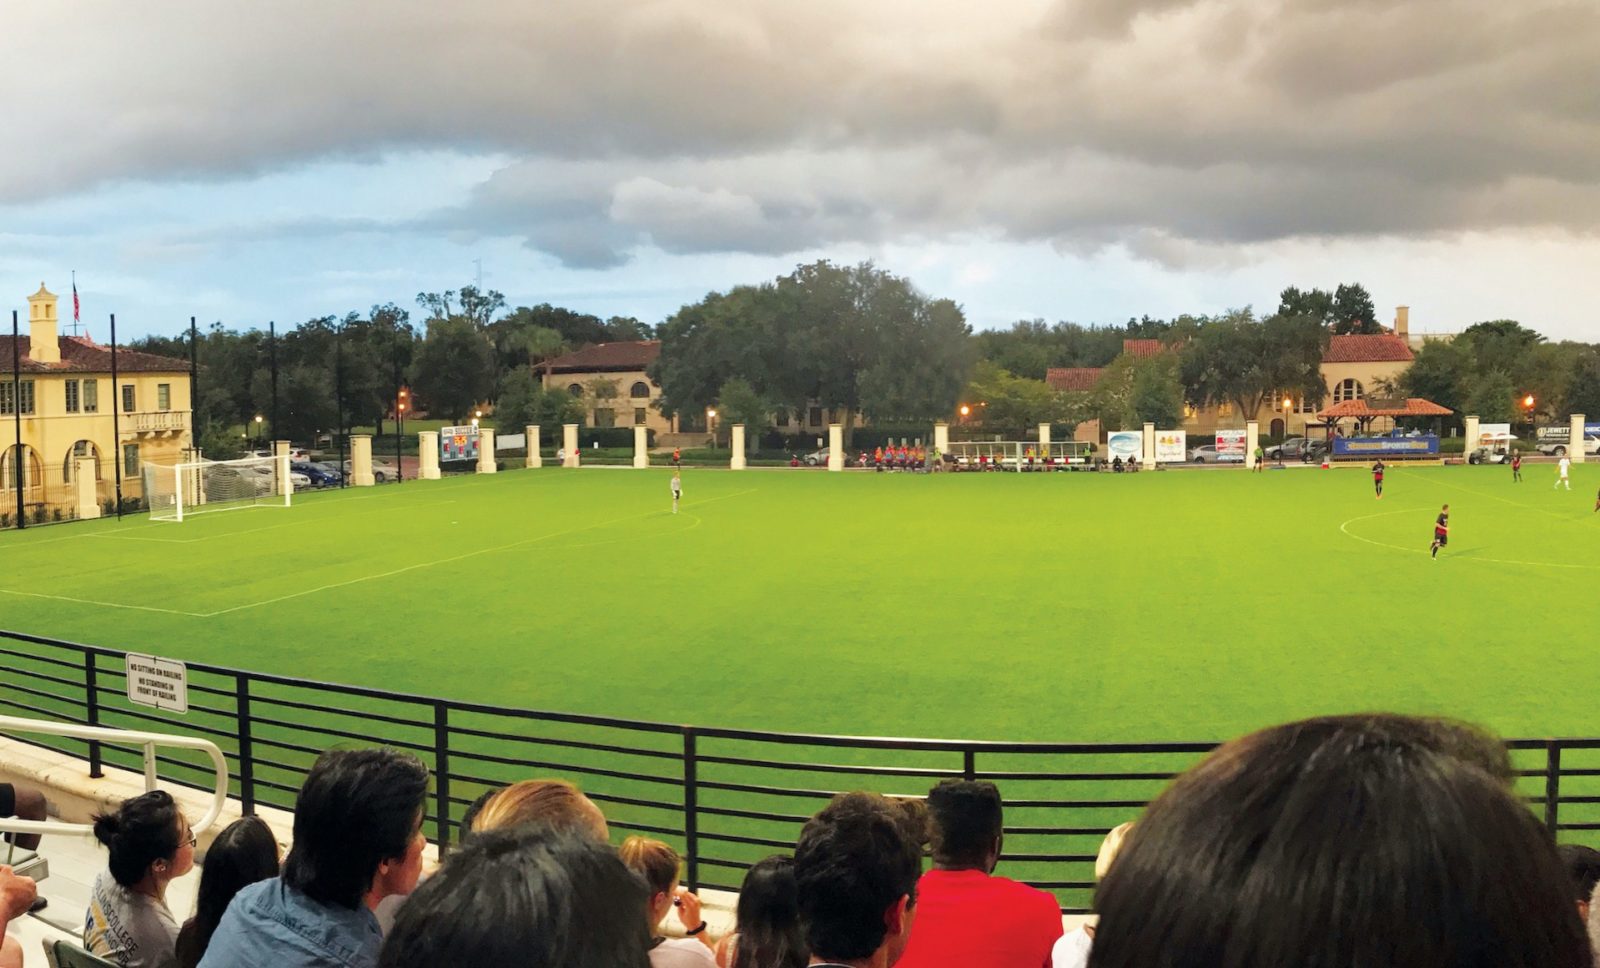 Rollins College Sandspur Stadium and soccer field.